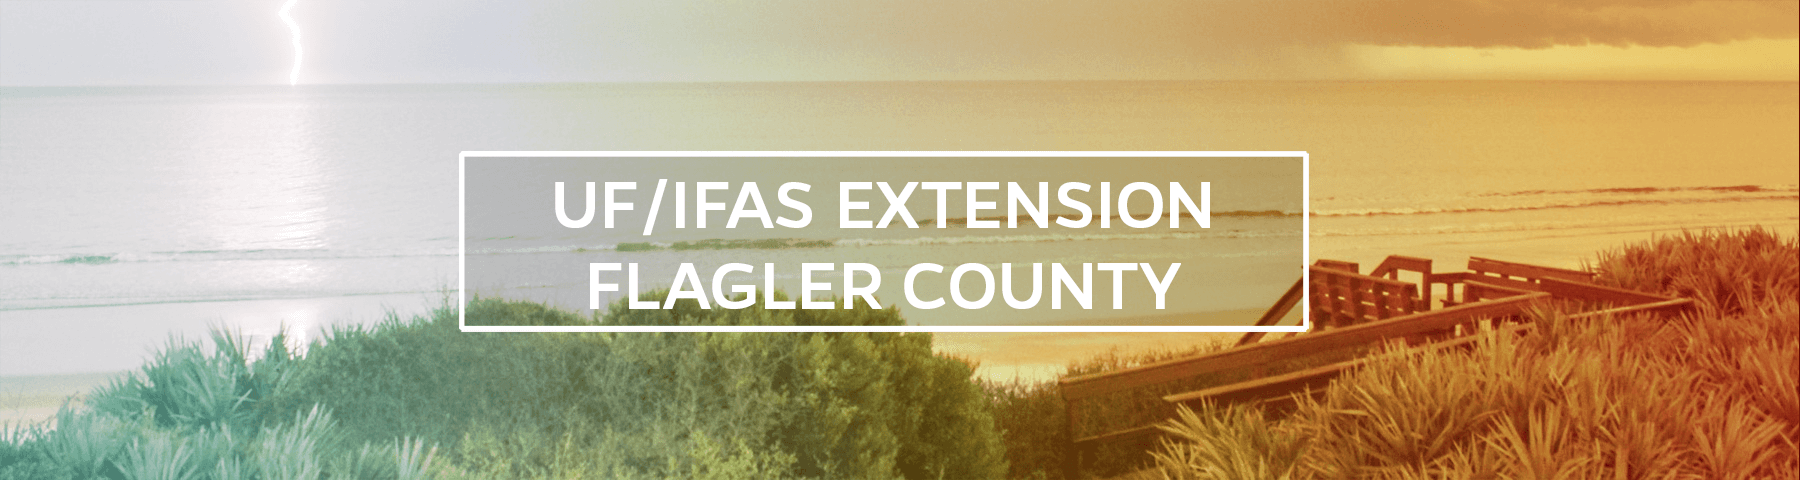 UF/IFAS Extension Flagler County